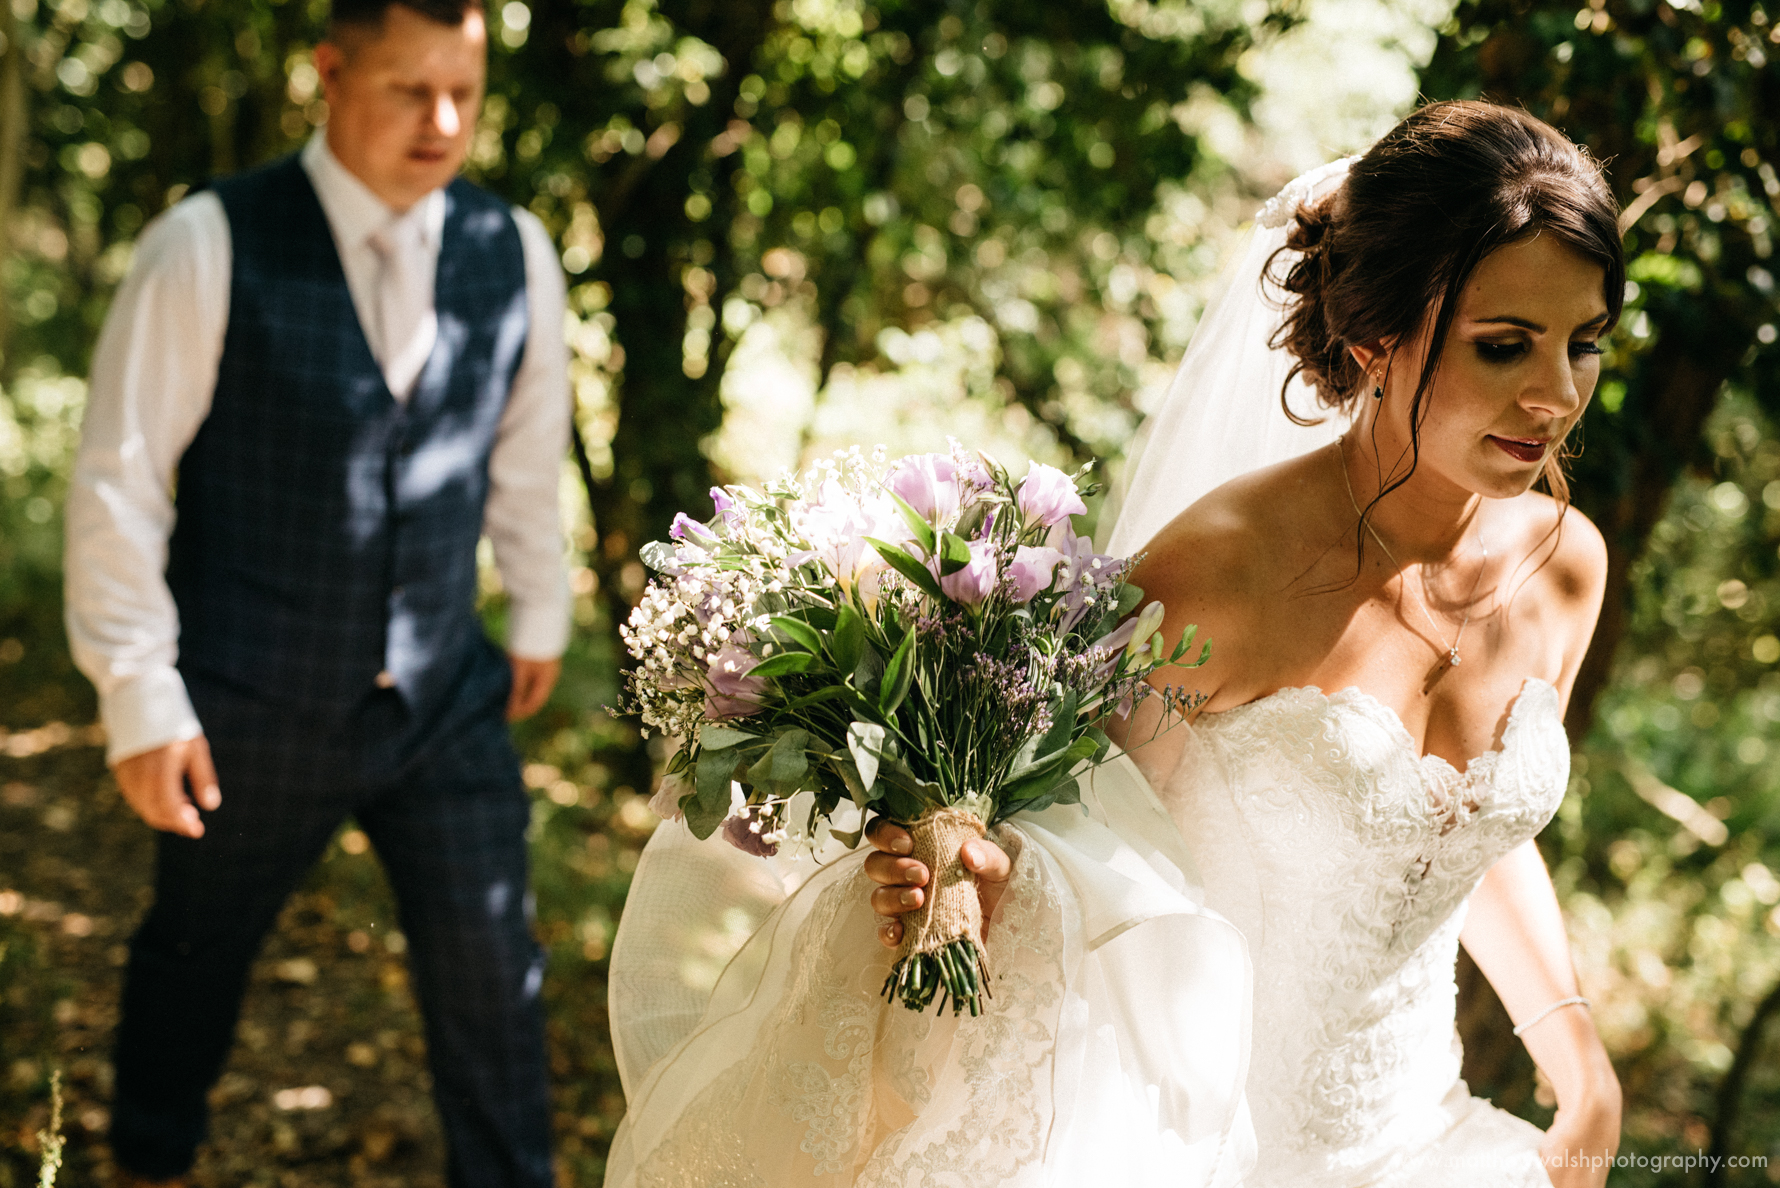 A stunning artistic photograph as the bride and groom walk through the amazing forest backdrop